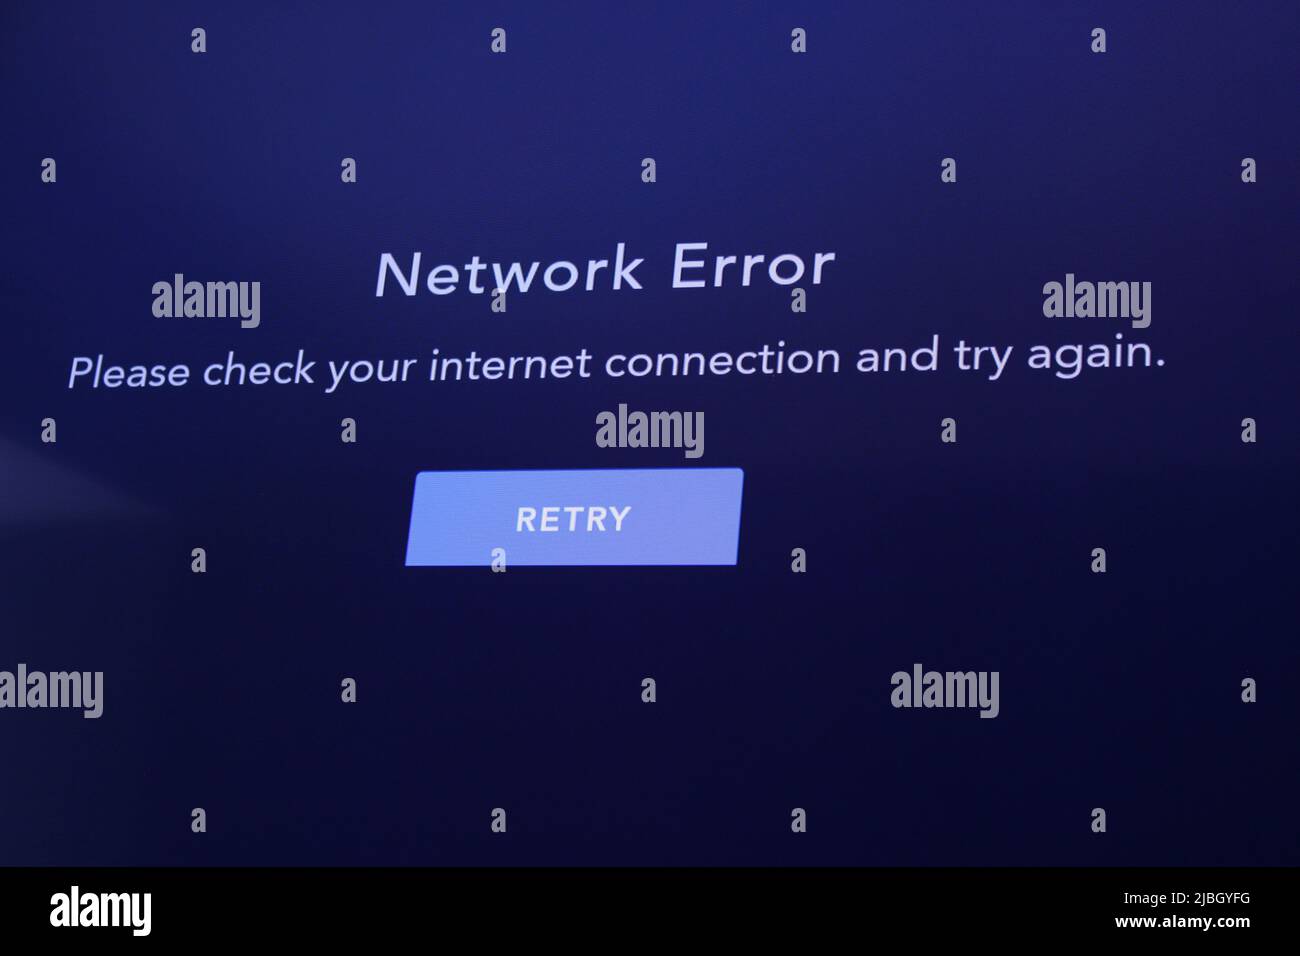 Network error warning. Concept for no internet, wifi issues, modern dependence on the internet, disconnecting, unplugging Stock Photo